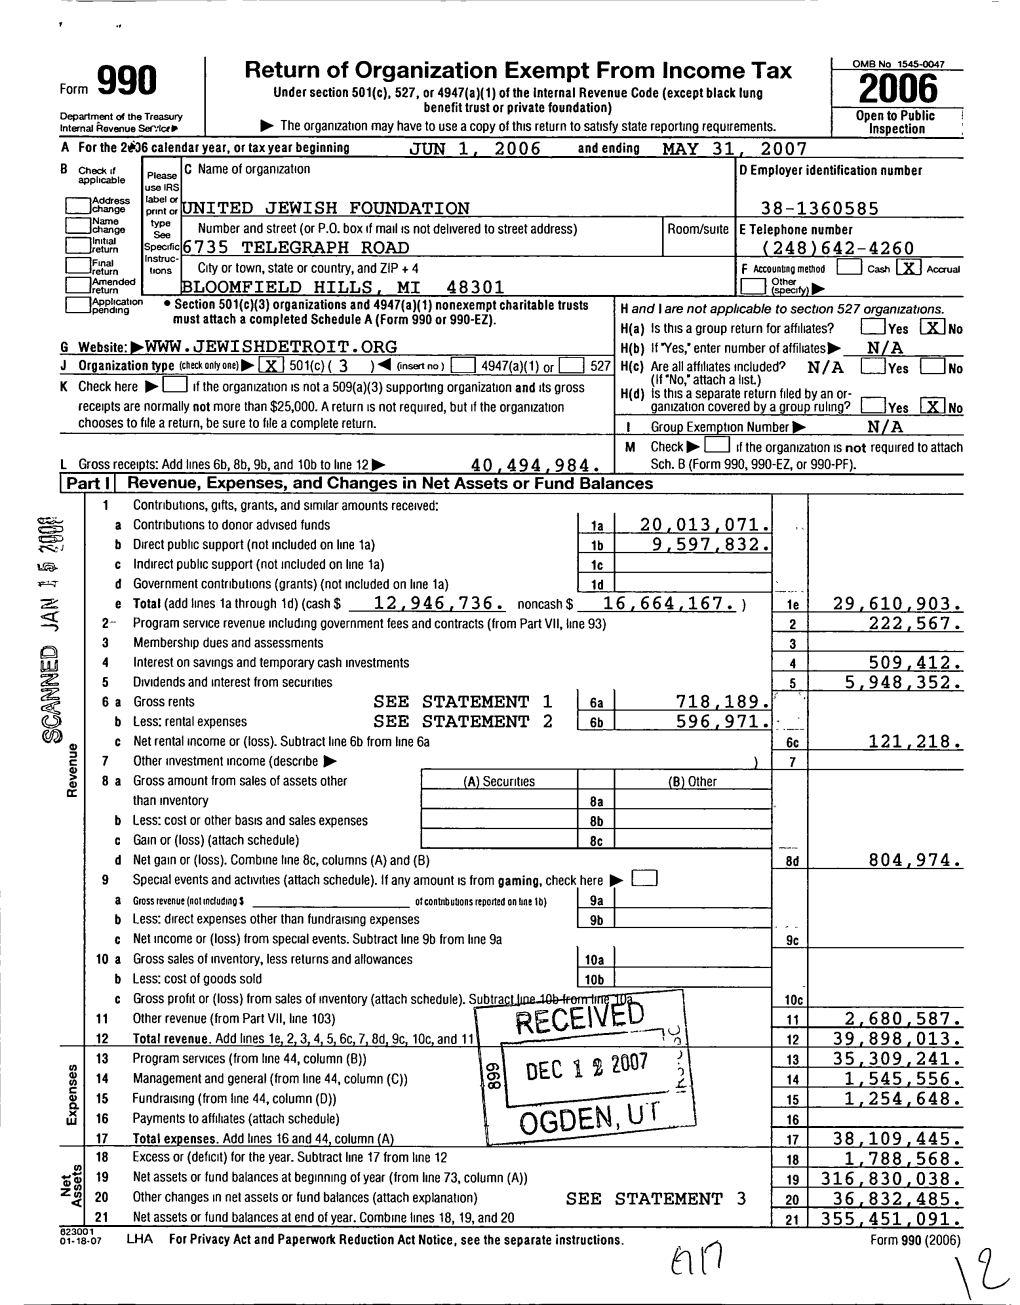 Return of Organization Exempt from Income Tax OMB No 1545-M